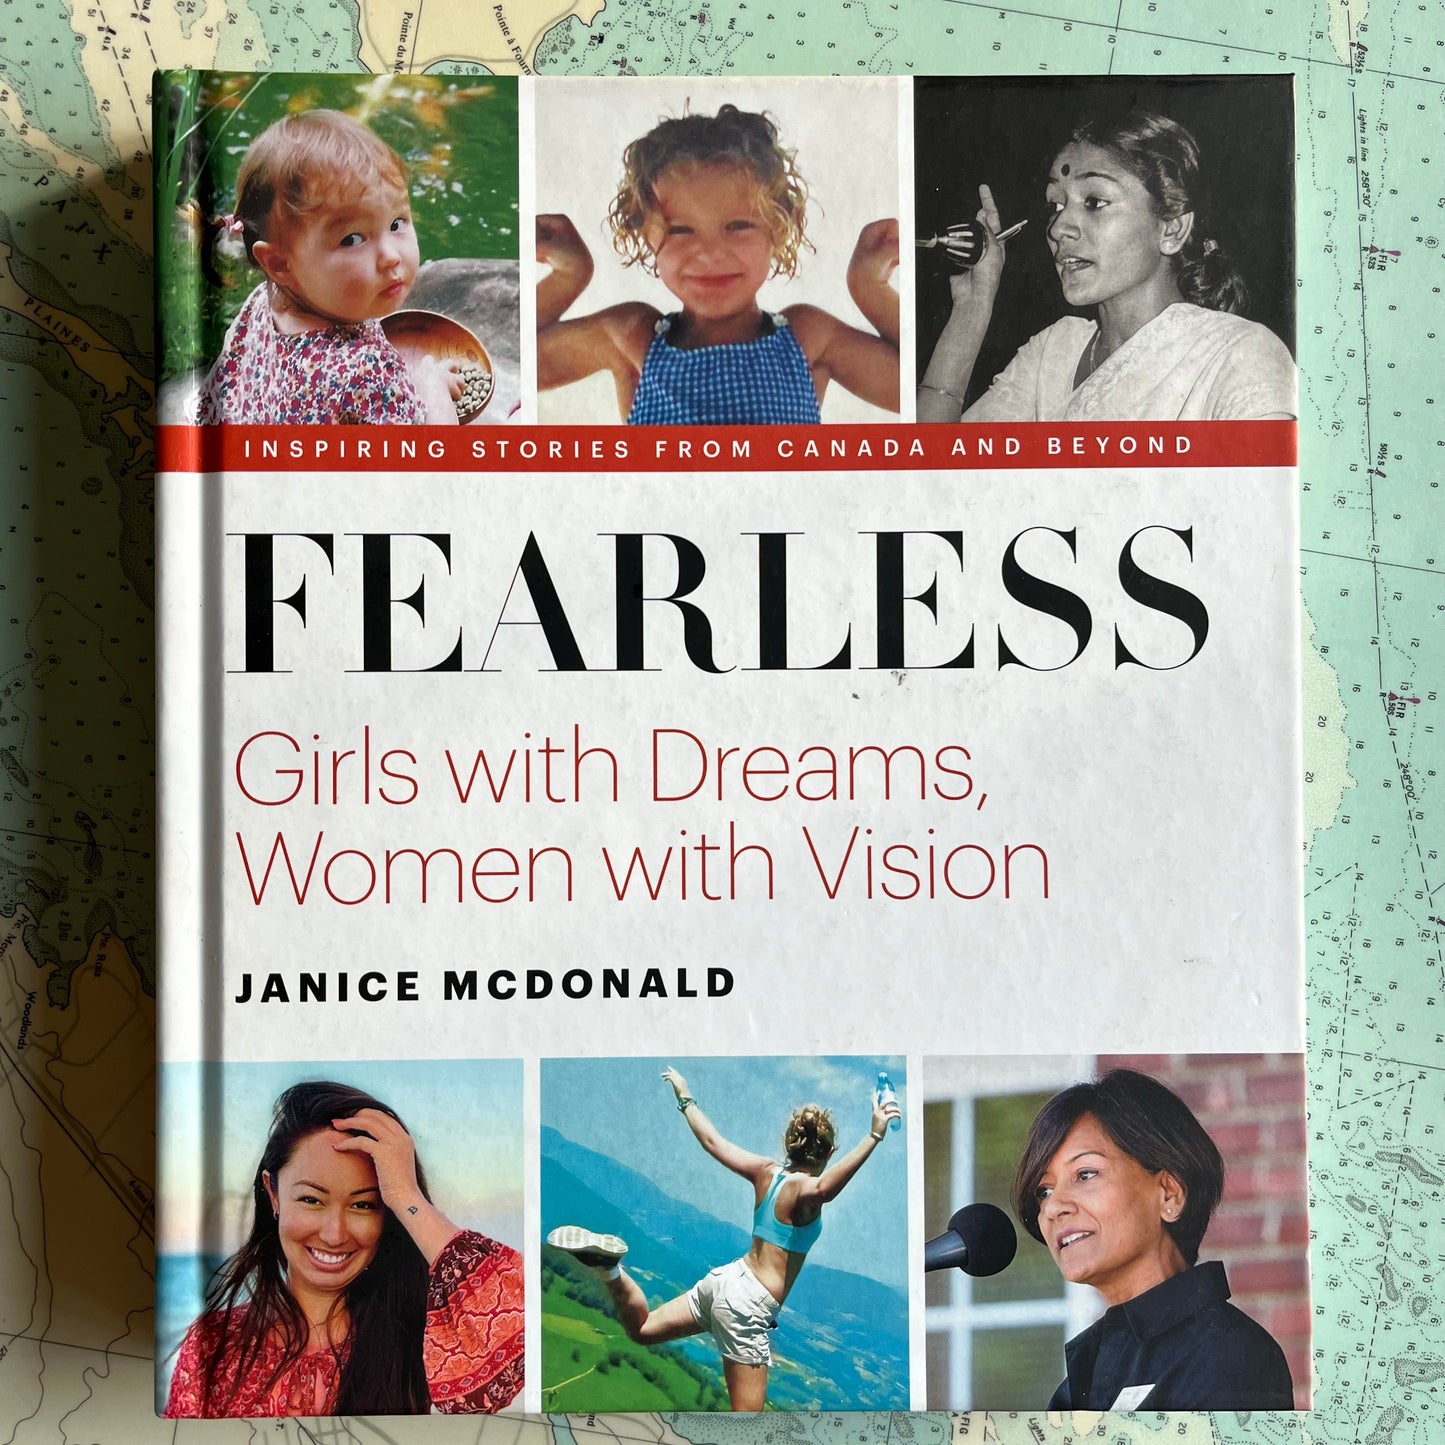 Fearless Girls with Dreams, Women with Vision